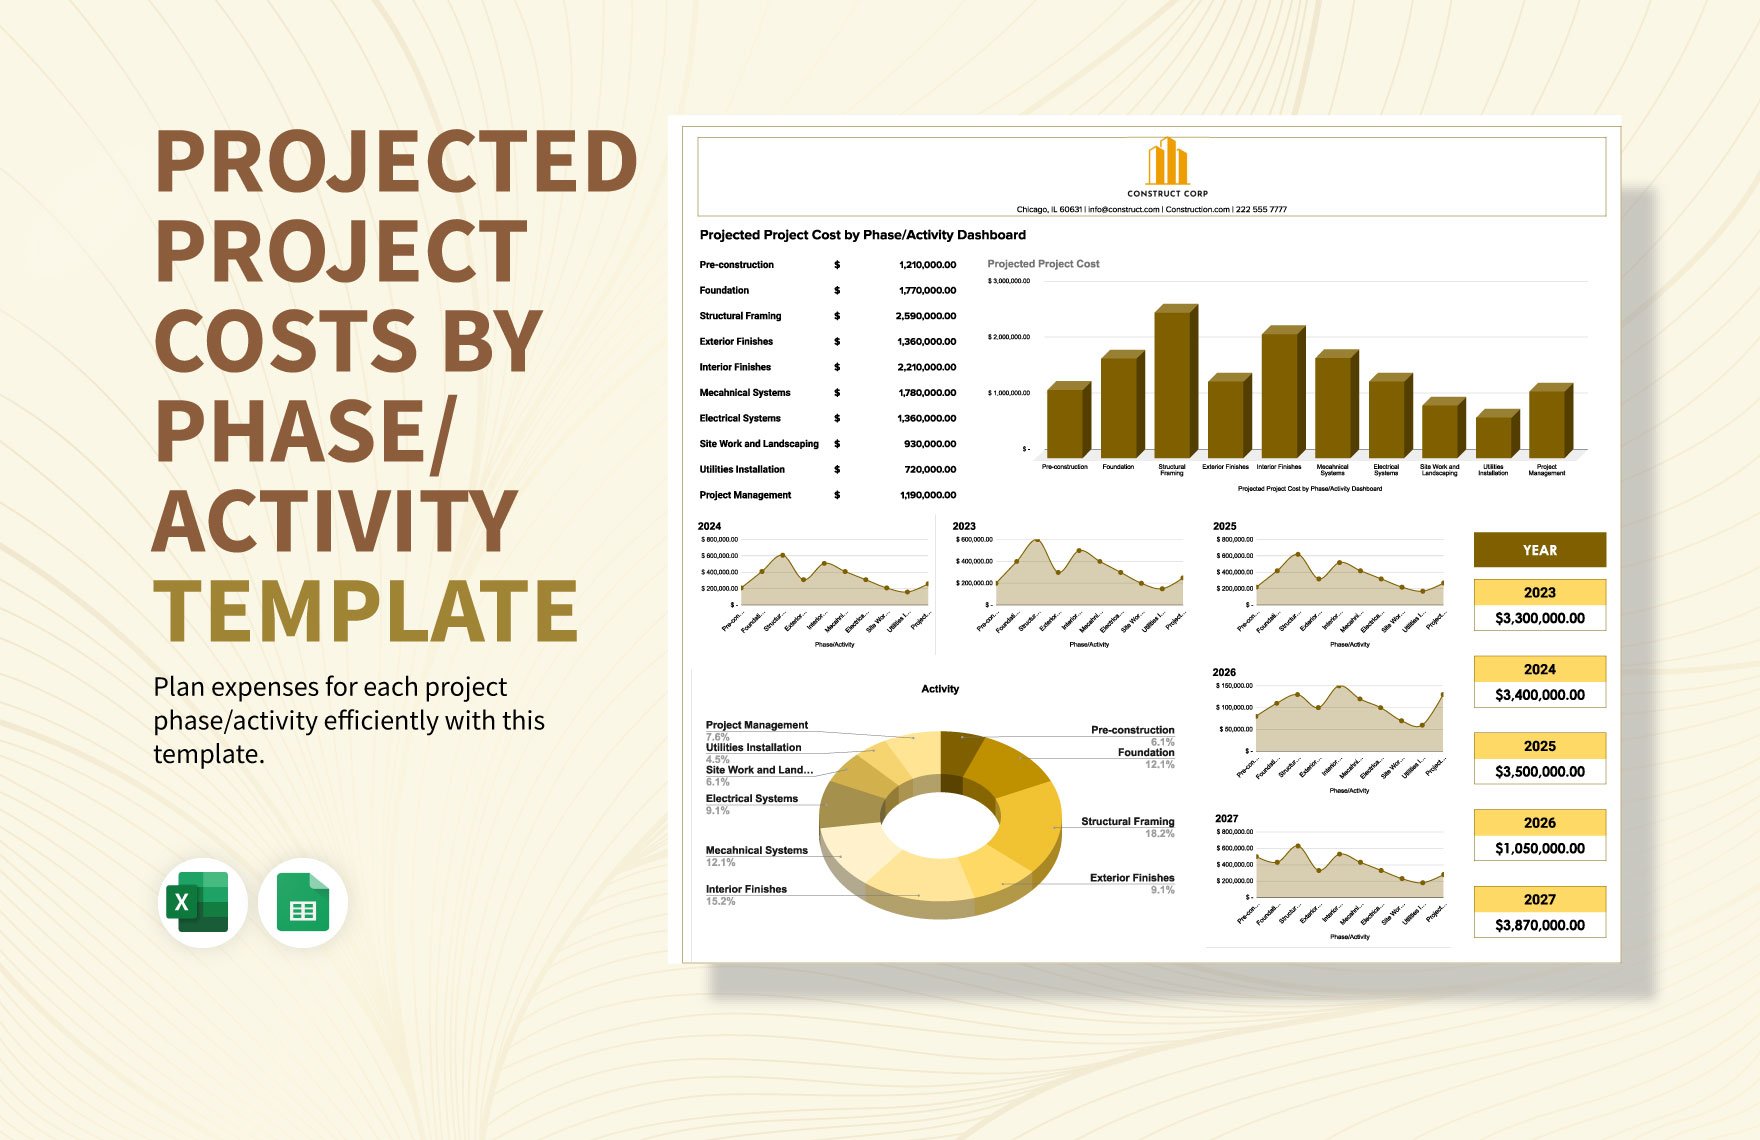 Projected Project Costs by Phase/Activity Template